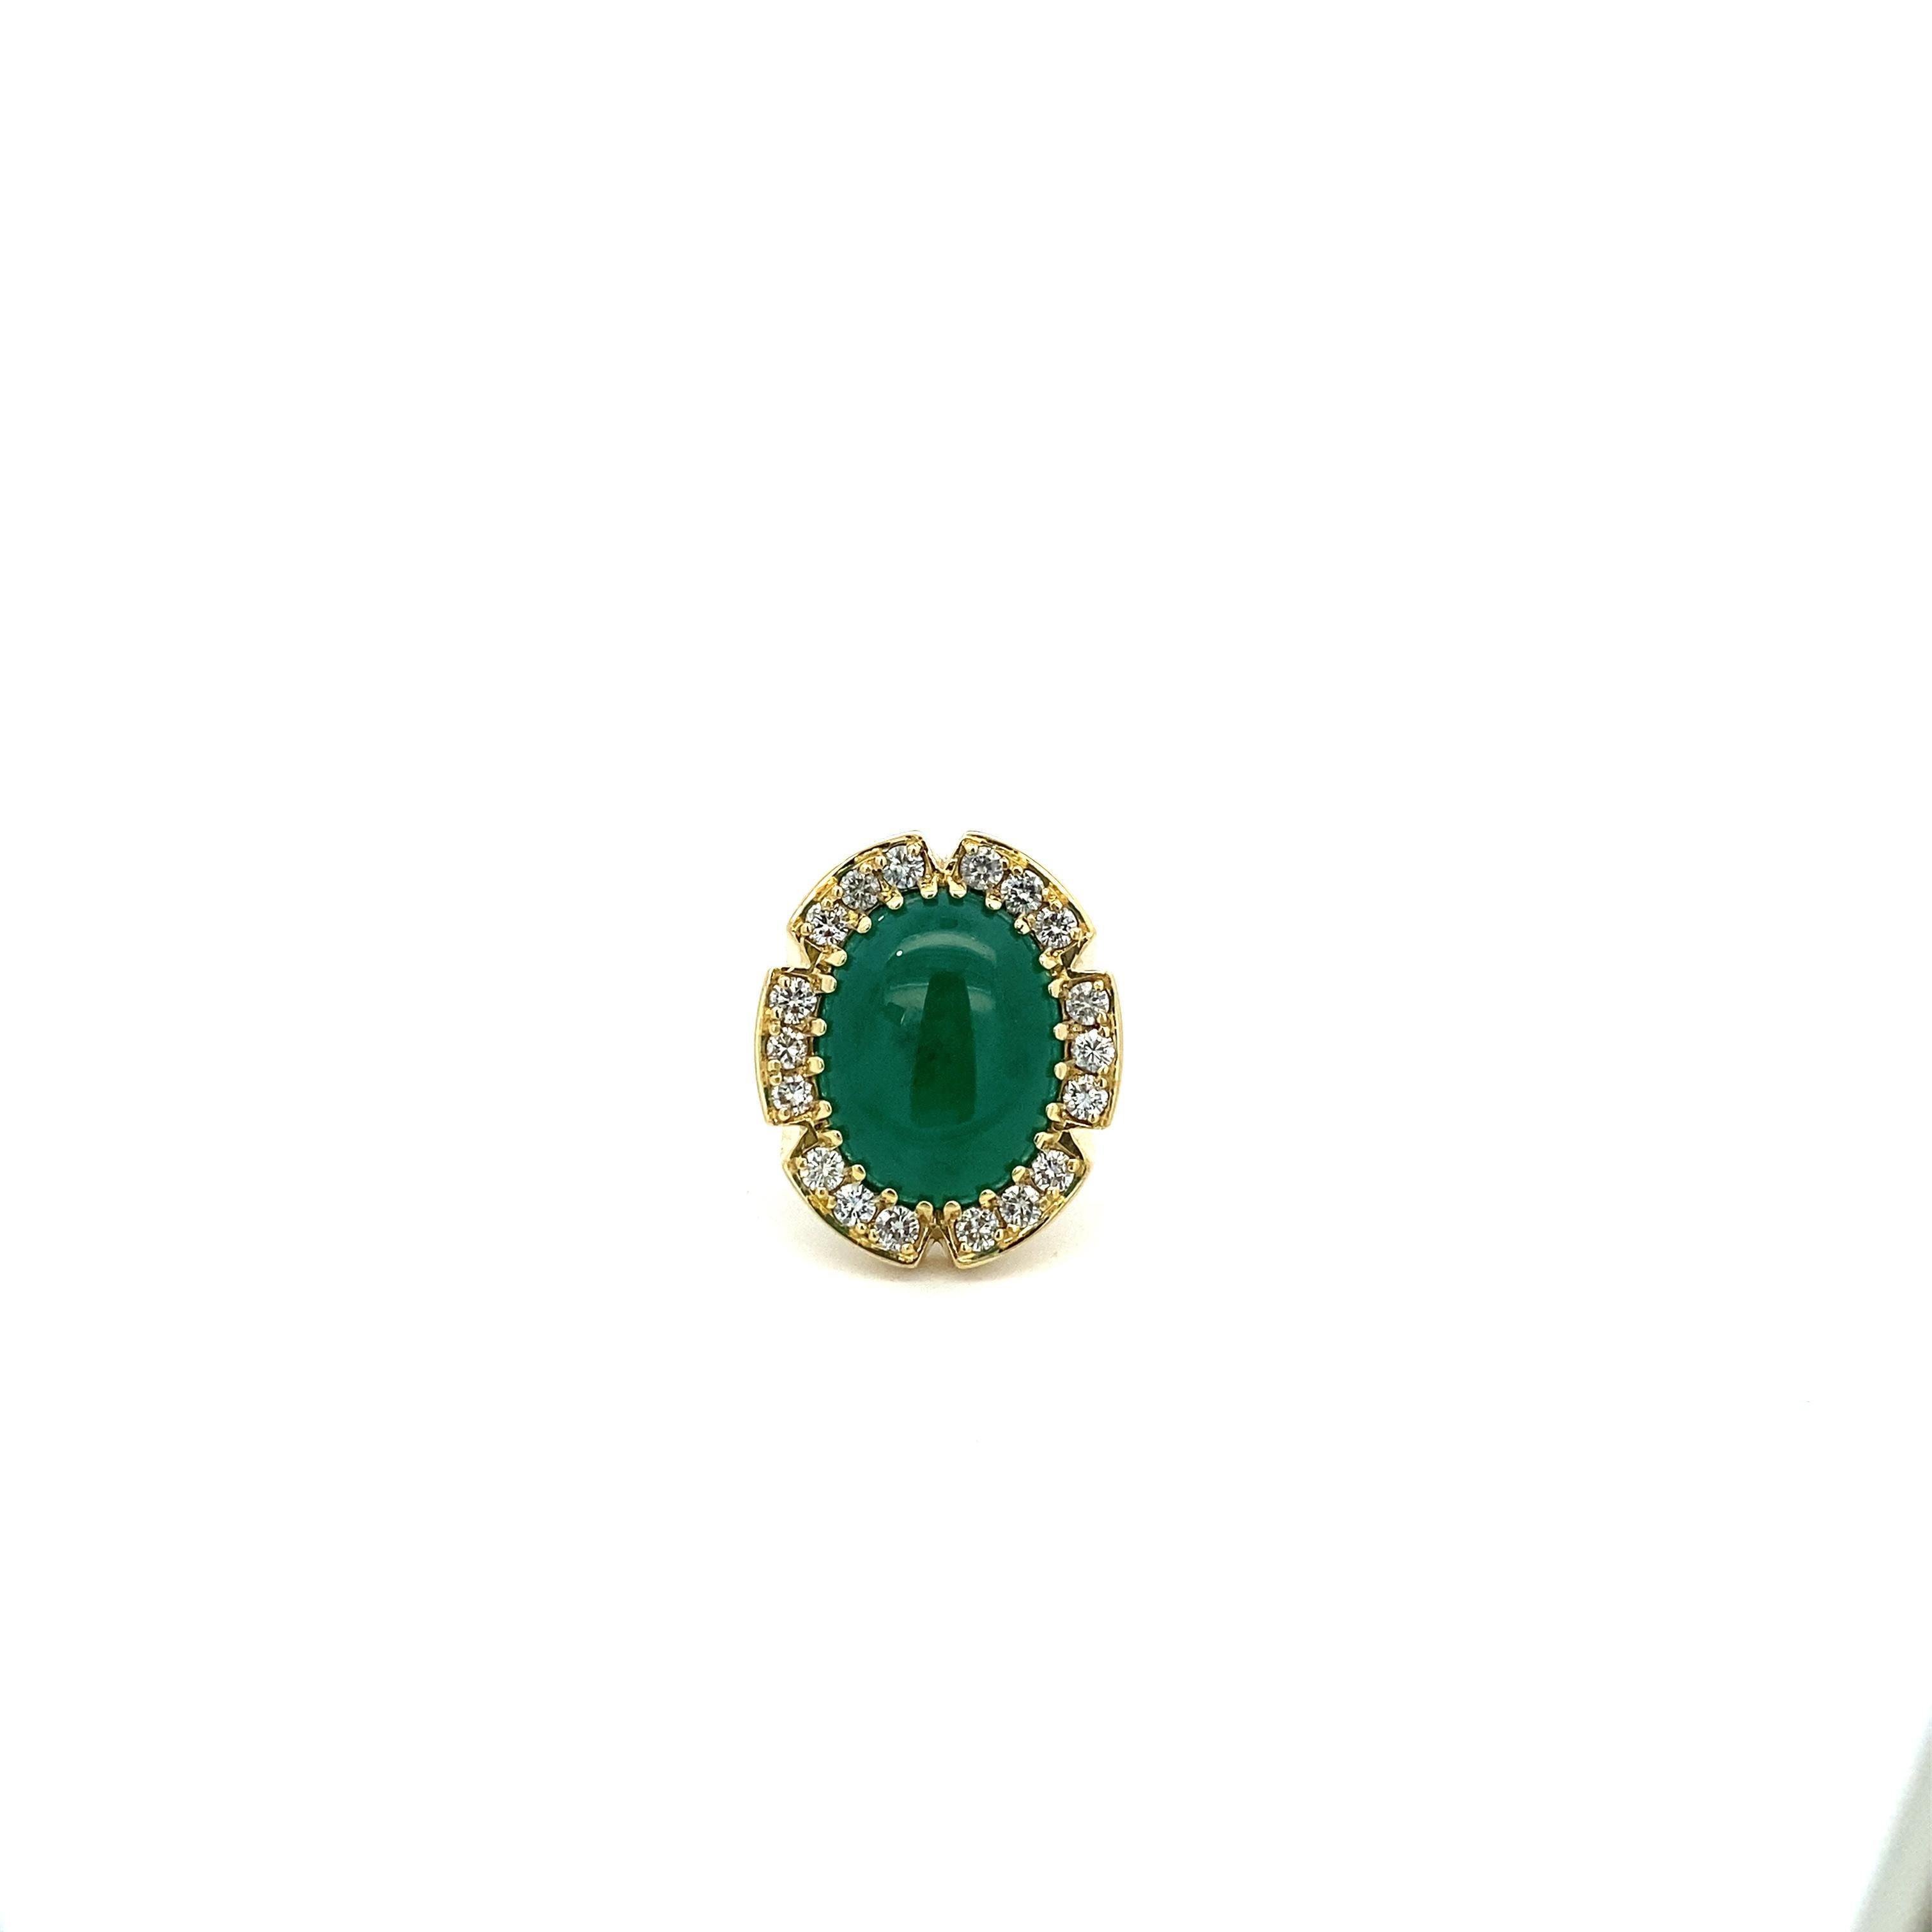 Introducing our exquisite Oval Cabochon Emerald and Diamond Custom Ring, a true masterpiece in the world of jewelry custom made by William Sheahan Designs in Dallas, Texas. This stunning piece showcases a captivating 12.06 carat green emerald,